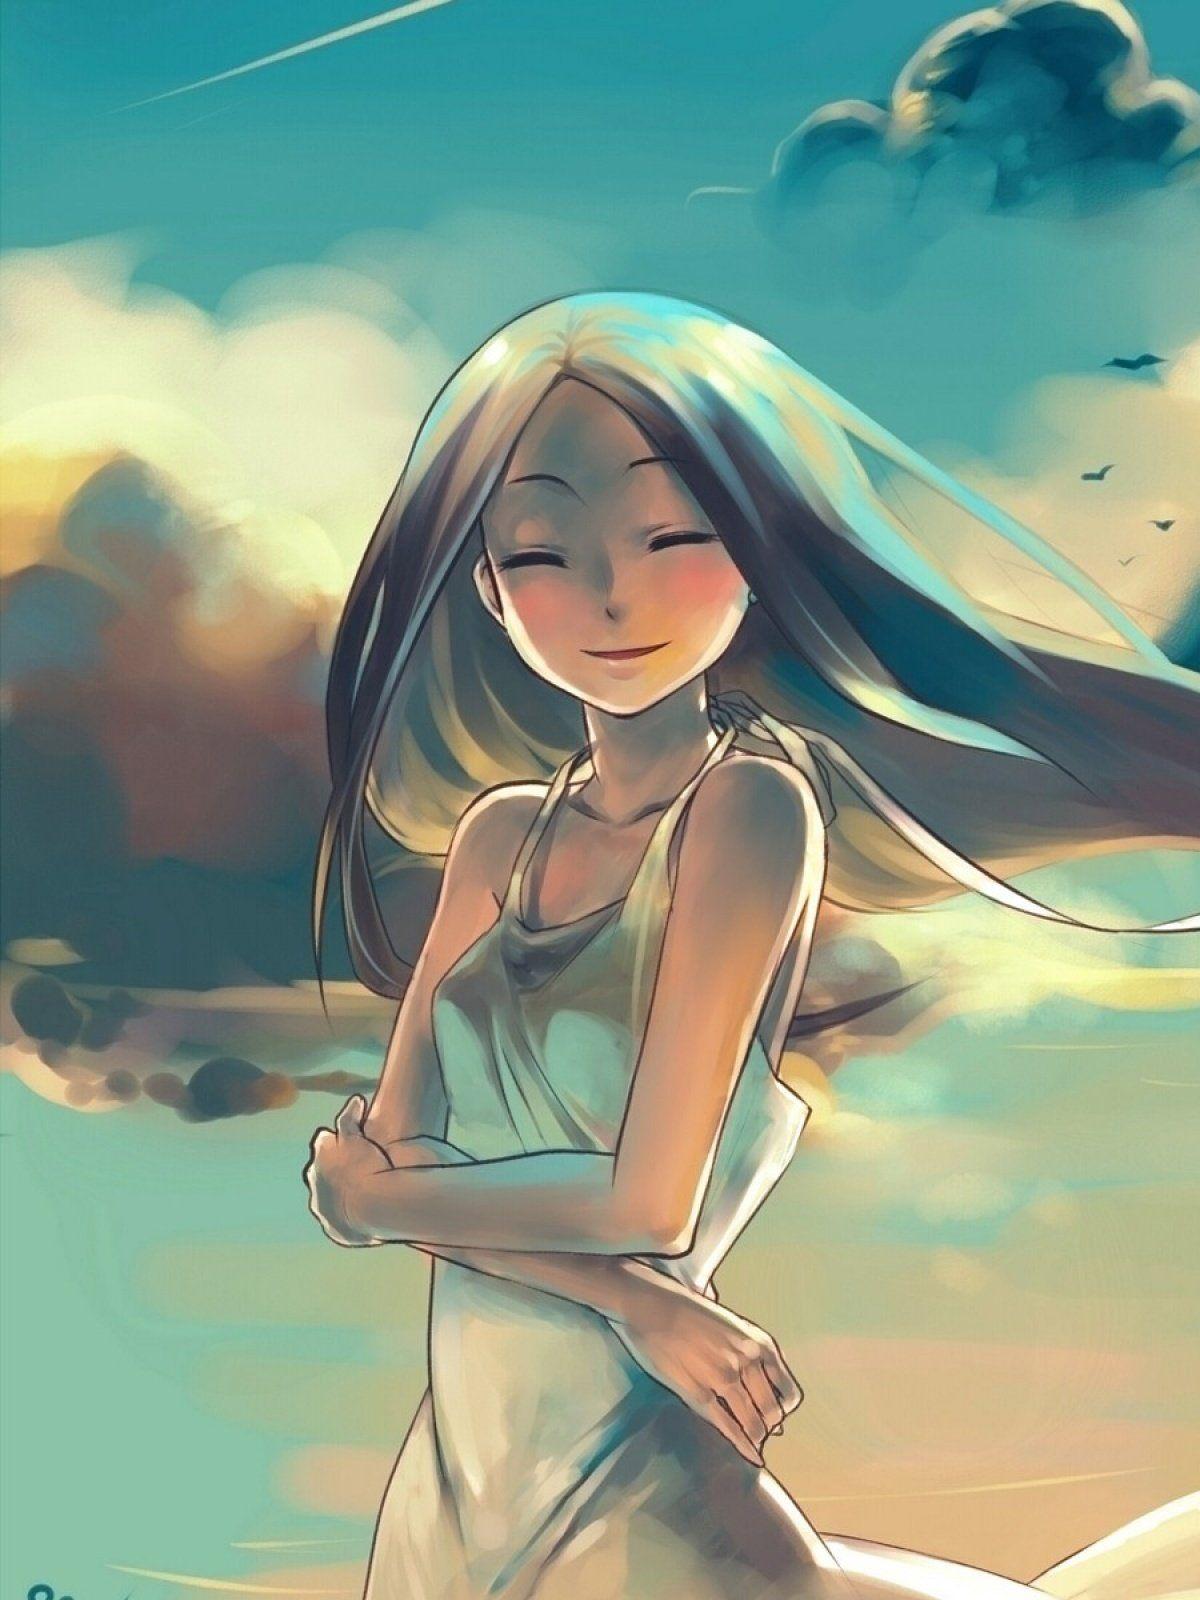 1200 x 1600 · jpeg - Animated Girl Wallpapers - Wallpaper Cave